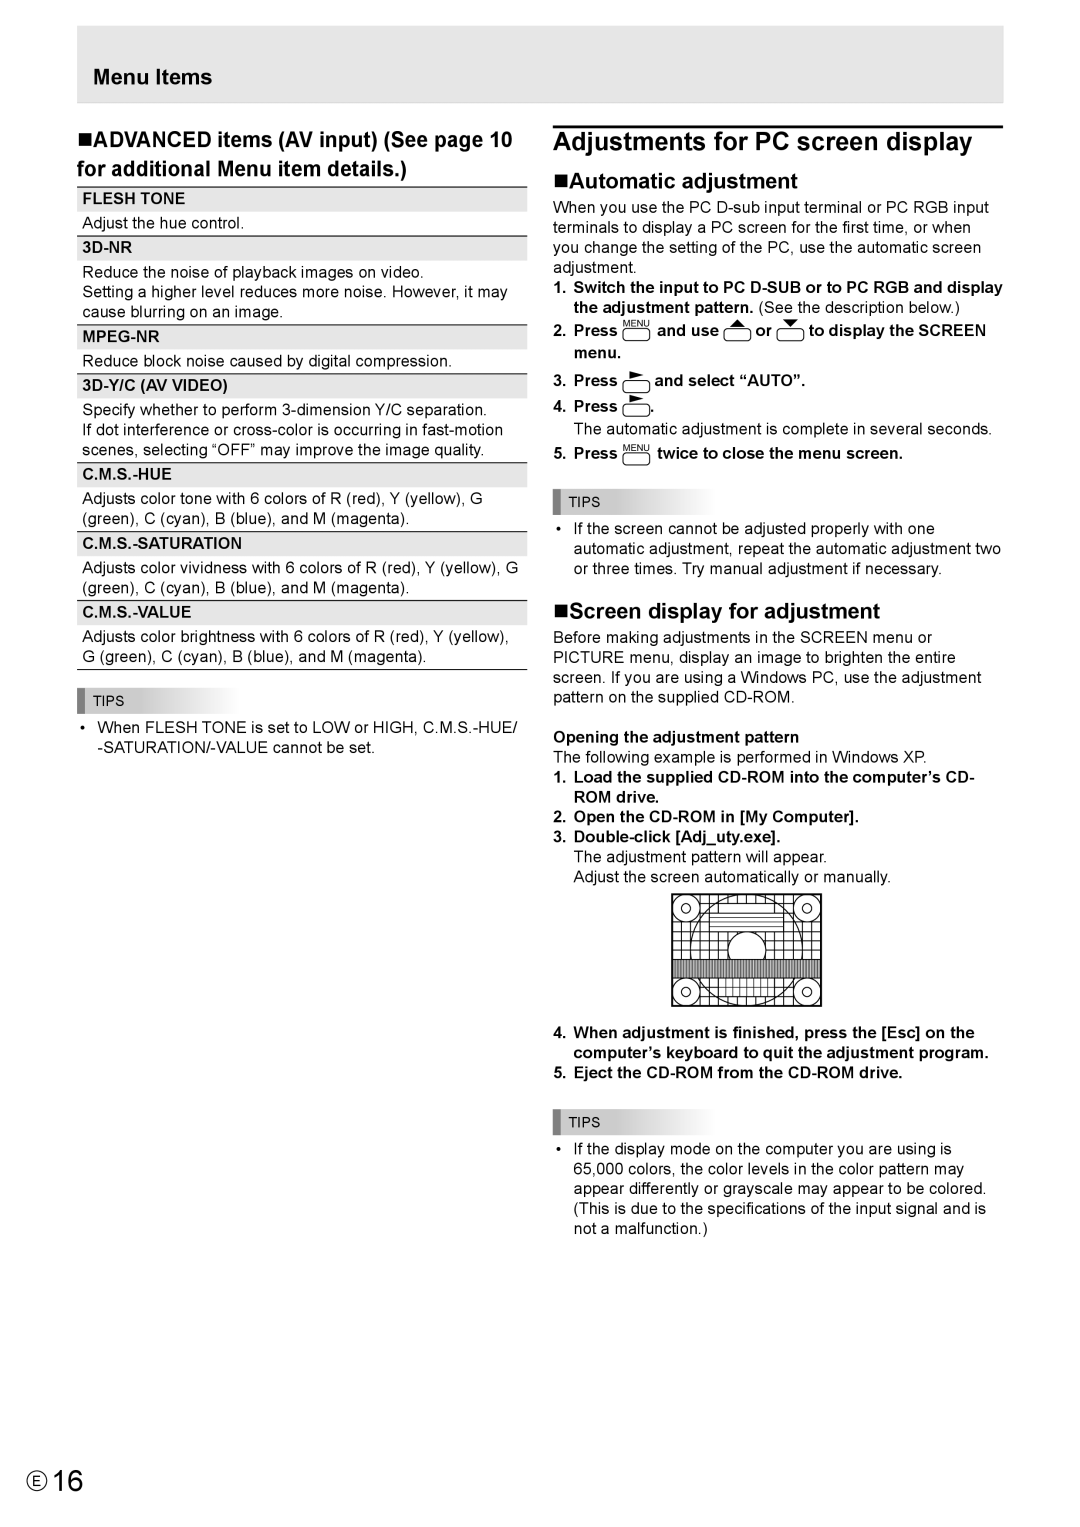 Sharp PN-E601 Adjustments for PC screen display, nADVANCED items AV input See page 10 for additional Menu item details 